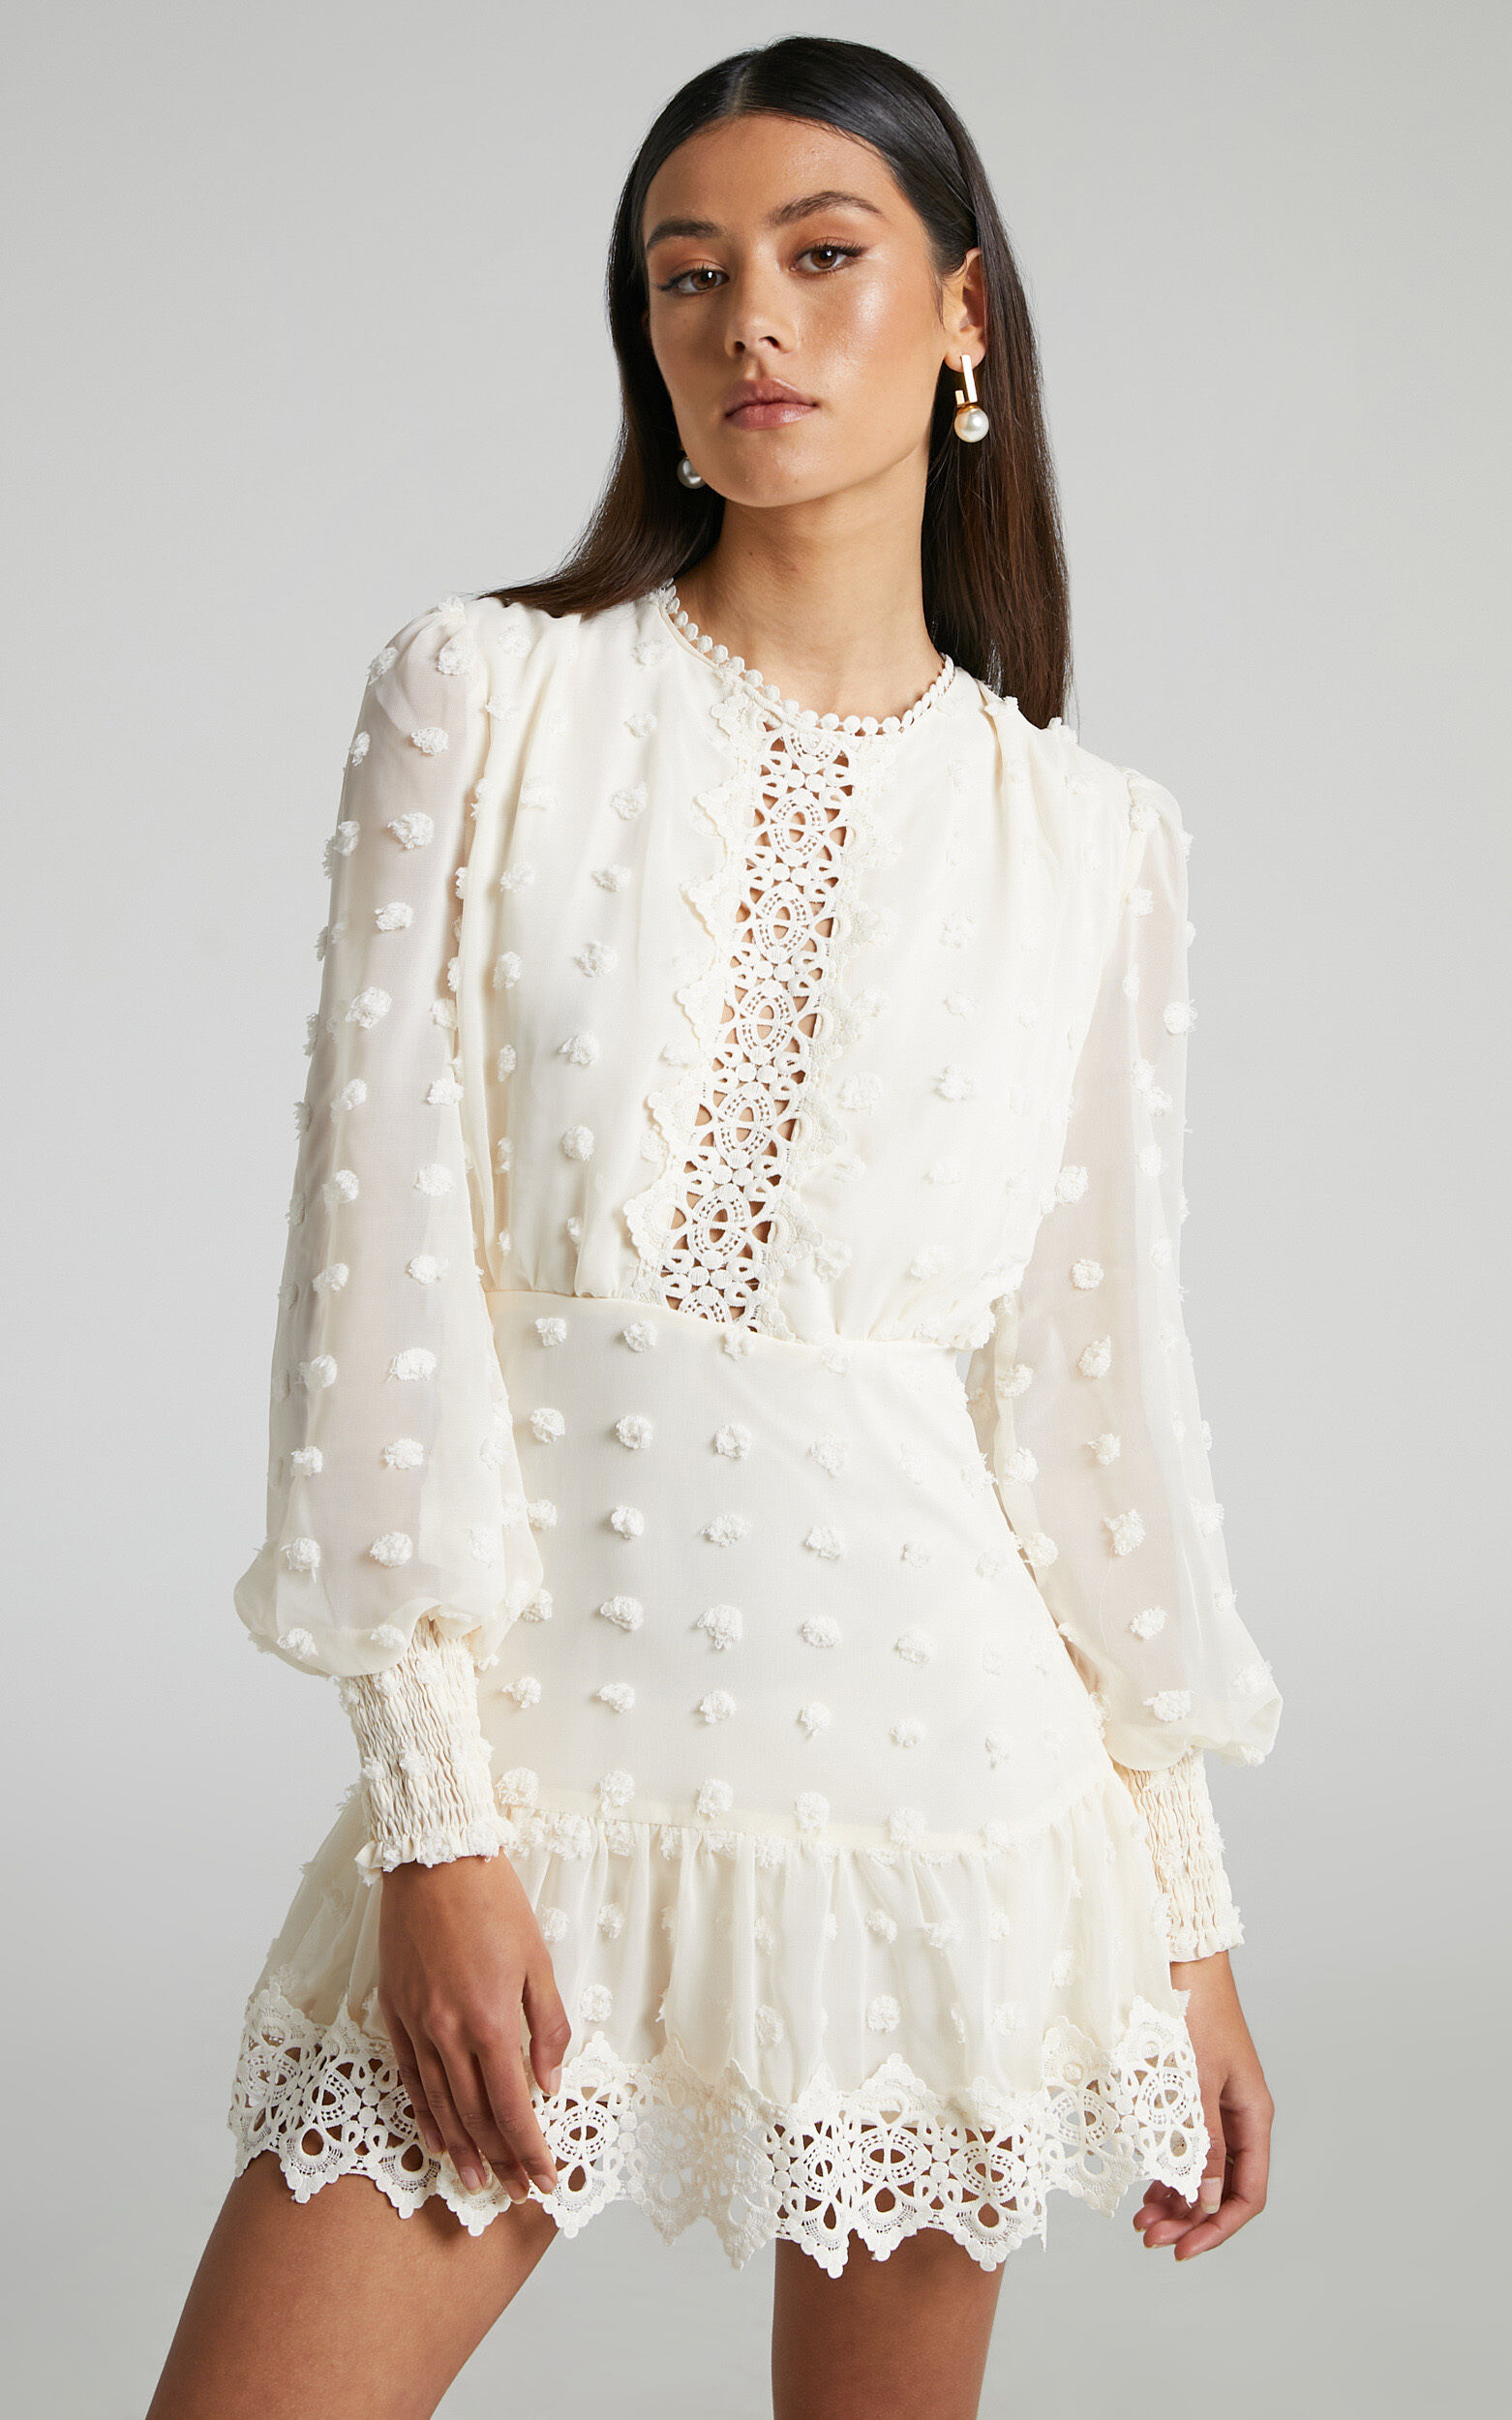 Meihna Mini Dress - Lace Detail Long Sleeve Dress in Cream - 06, CRE1, super-hi-res image number null